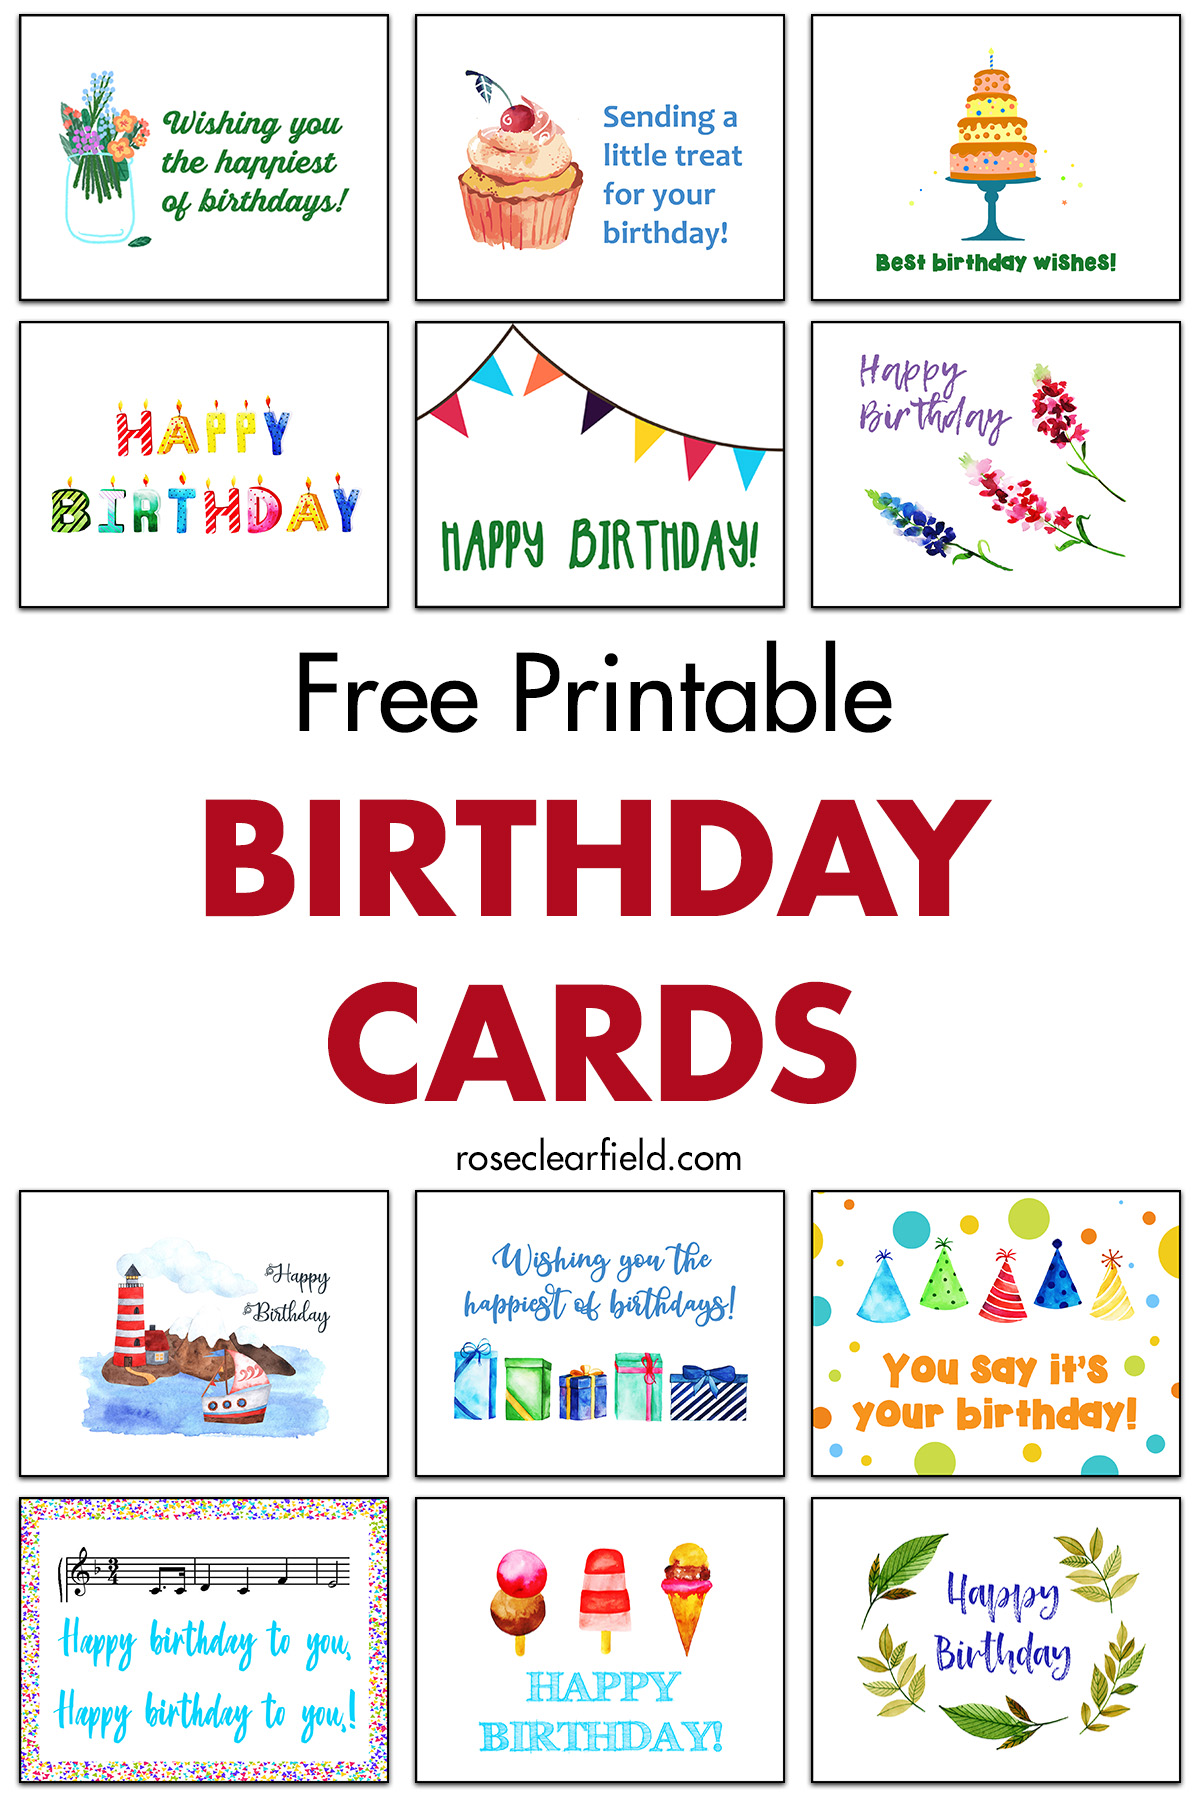 Free Printable Birthday Cards • Rose Clearfield